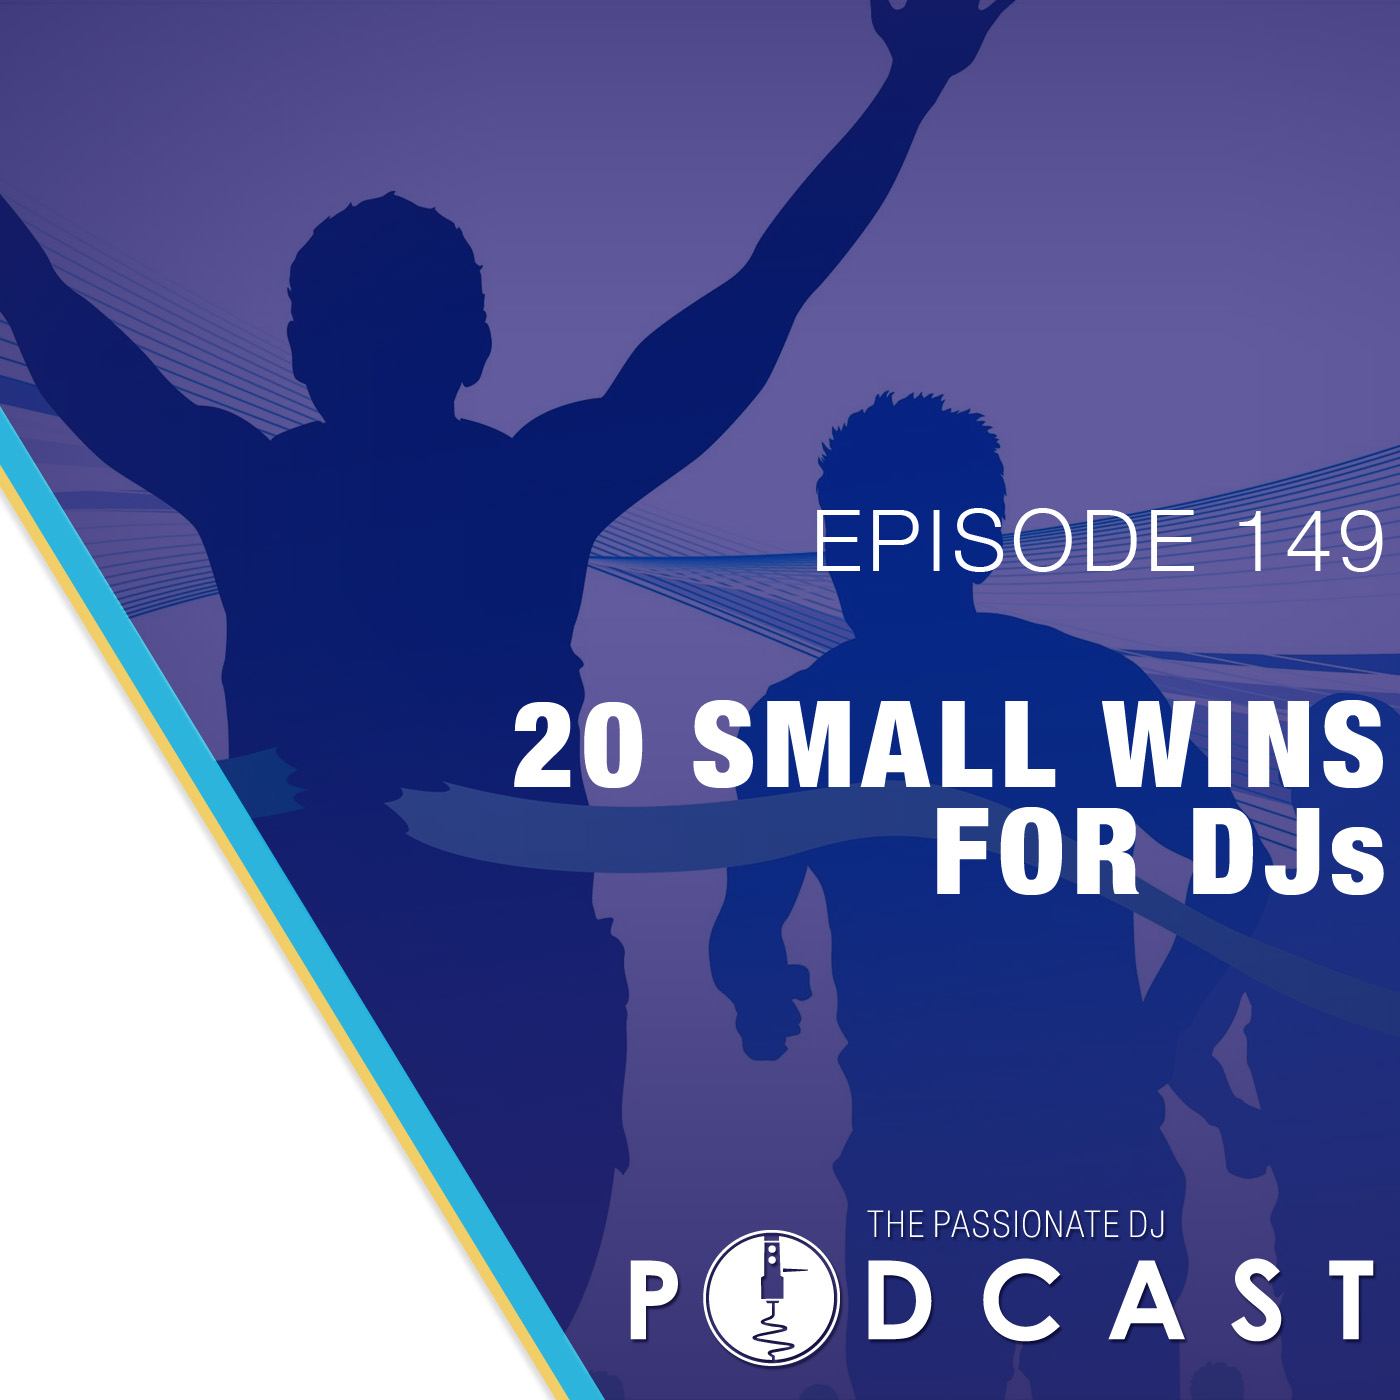 Episode 149: 20 Small Wins for DJs